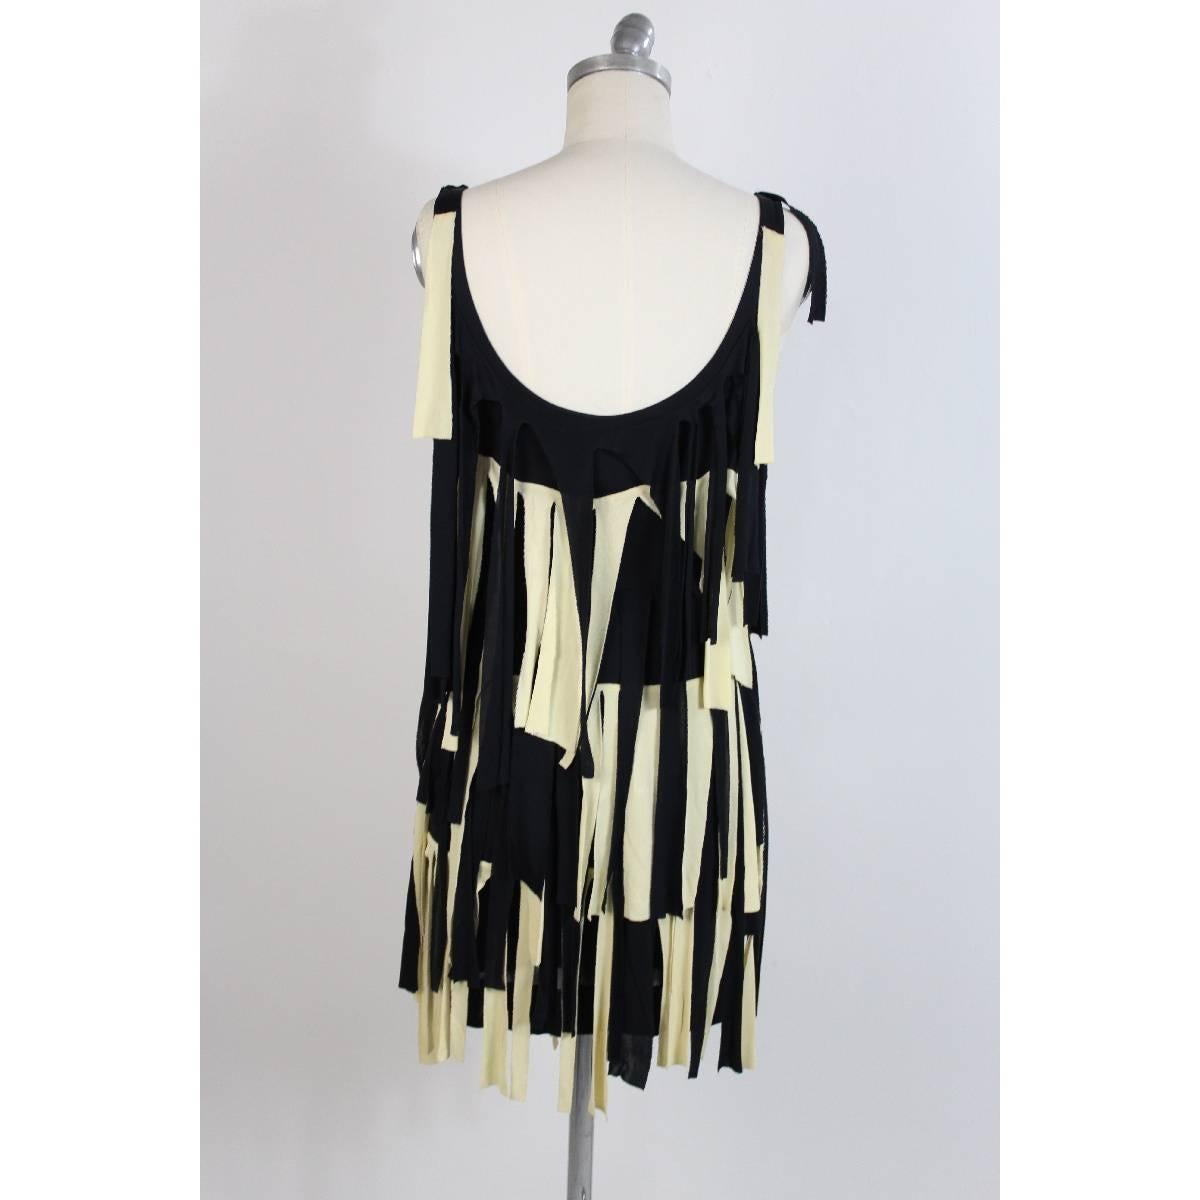 Moschino Couture vintage dress with beige and blue fringe, charleston model, sleeveless, stretch cotton, size 42 it, excellent condition.

Size 42 (IT); 8 US; 10 UK

Measures
Shoulder: 42 cm
Bust / chest: 43 cm
Length: 74 cm

Composition: stretch